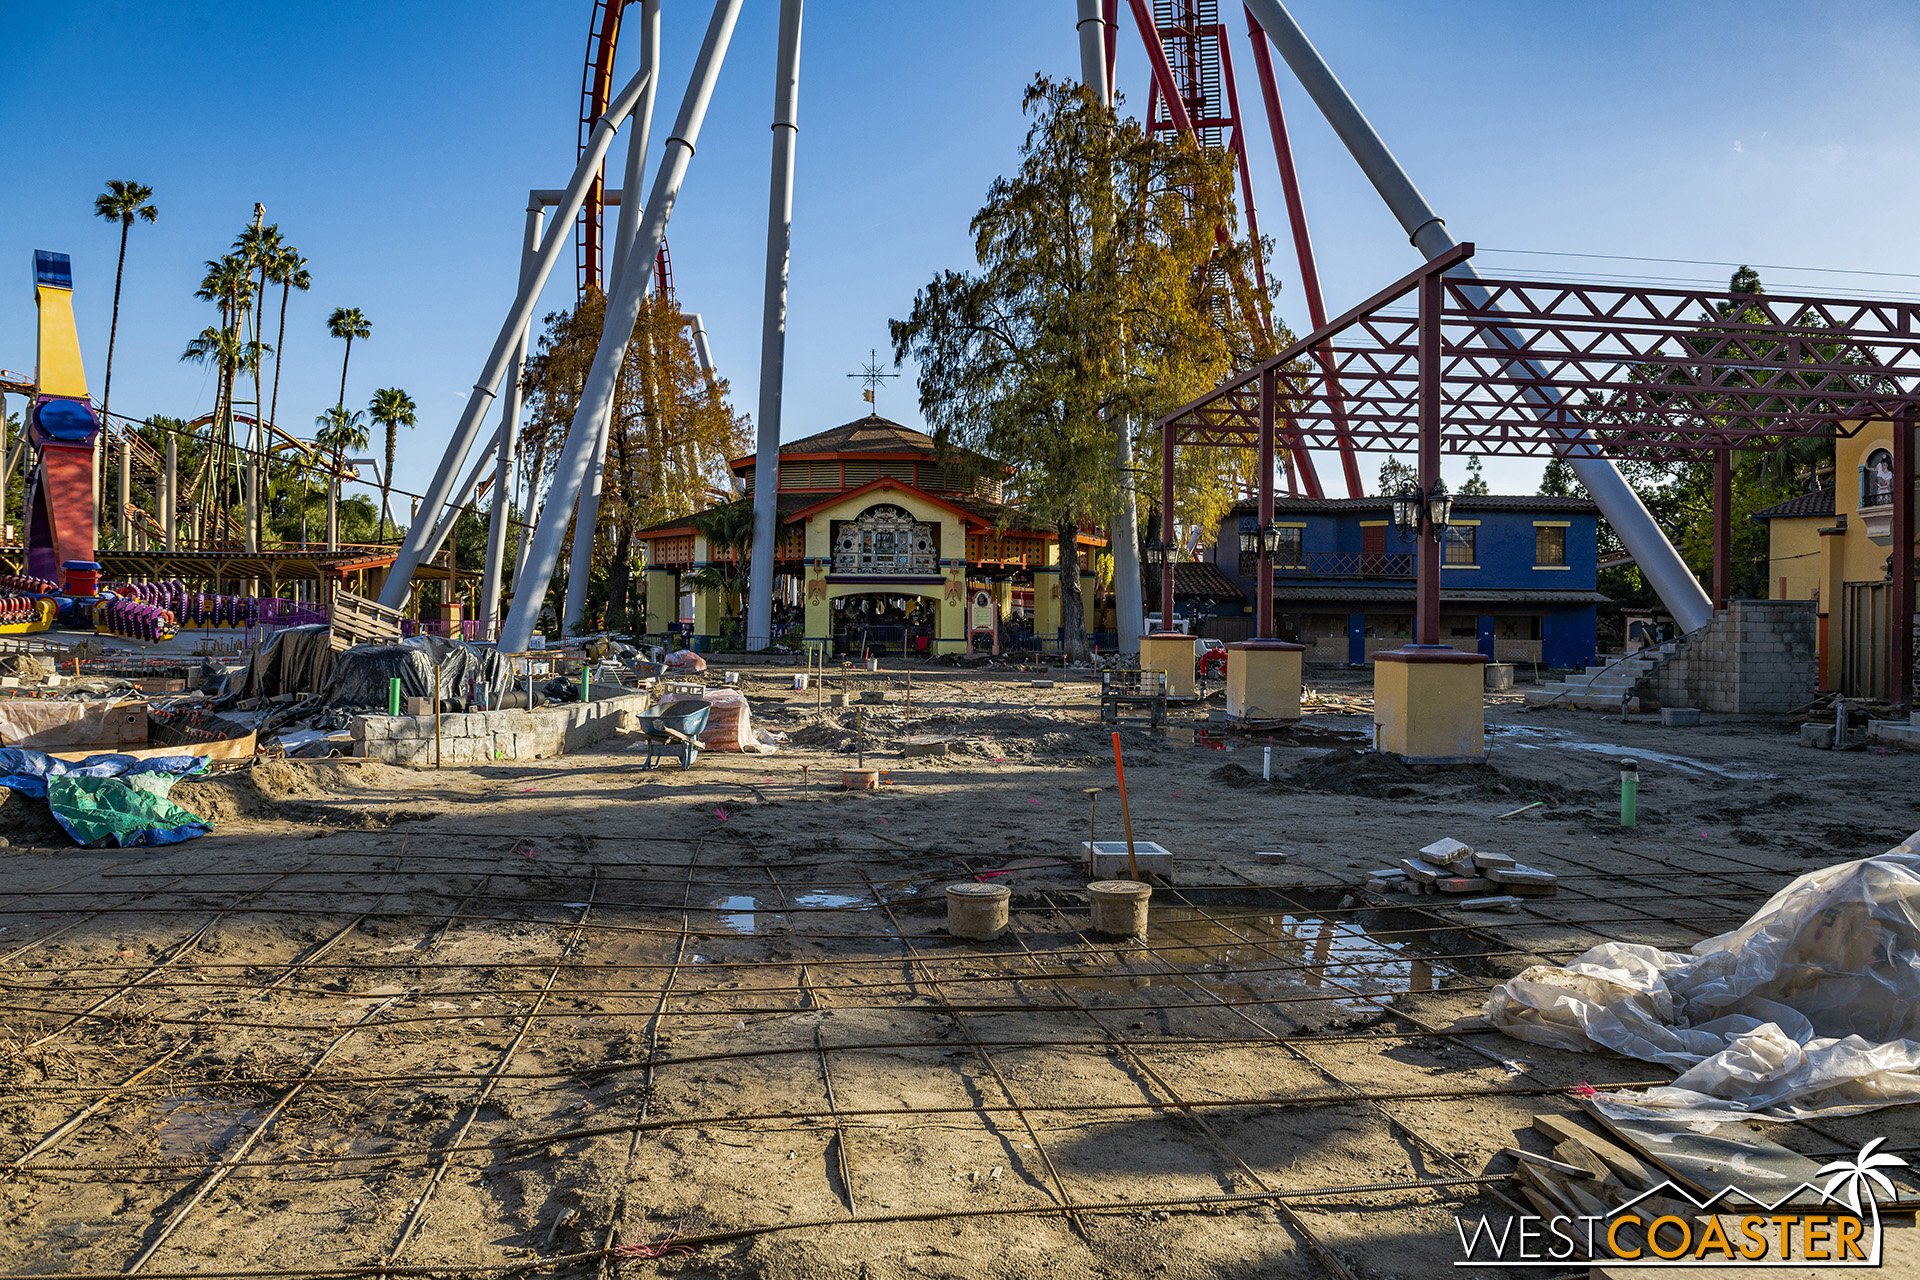  Rebar has been laid for new paving, and the Fiesta Village stage has been stripped down to its bare structure. 